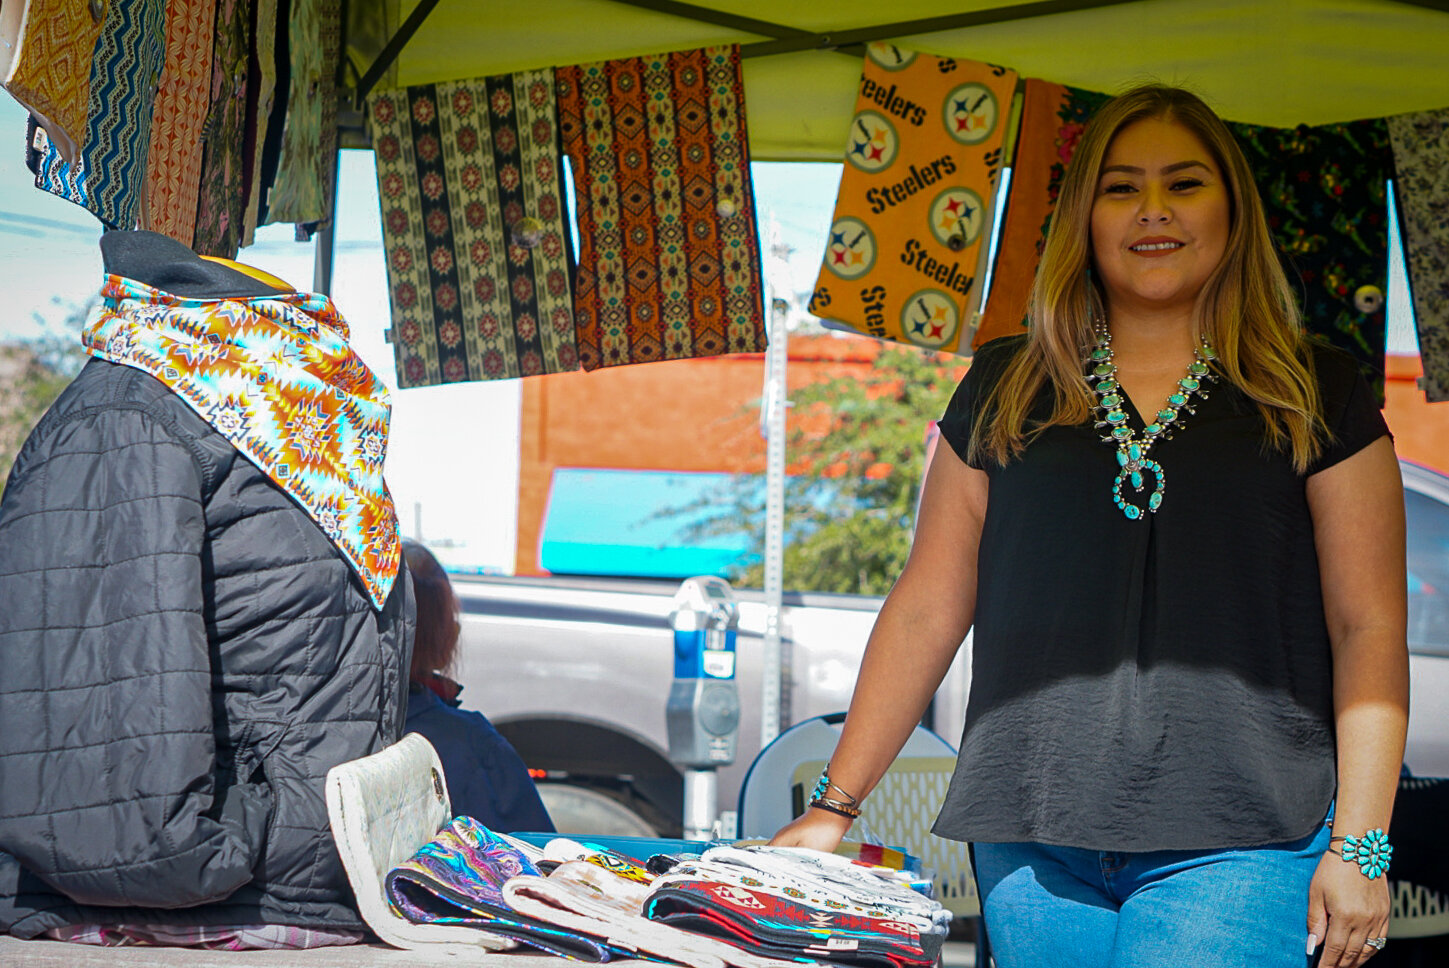 Indigenous Artisan Fest hosted by Roosevelt Row CDC, Indige Design Collab, and S.T.I.L.L. She Lives